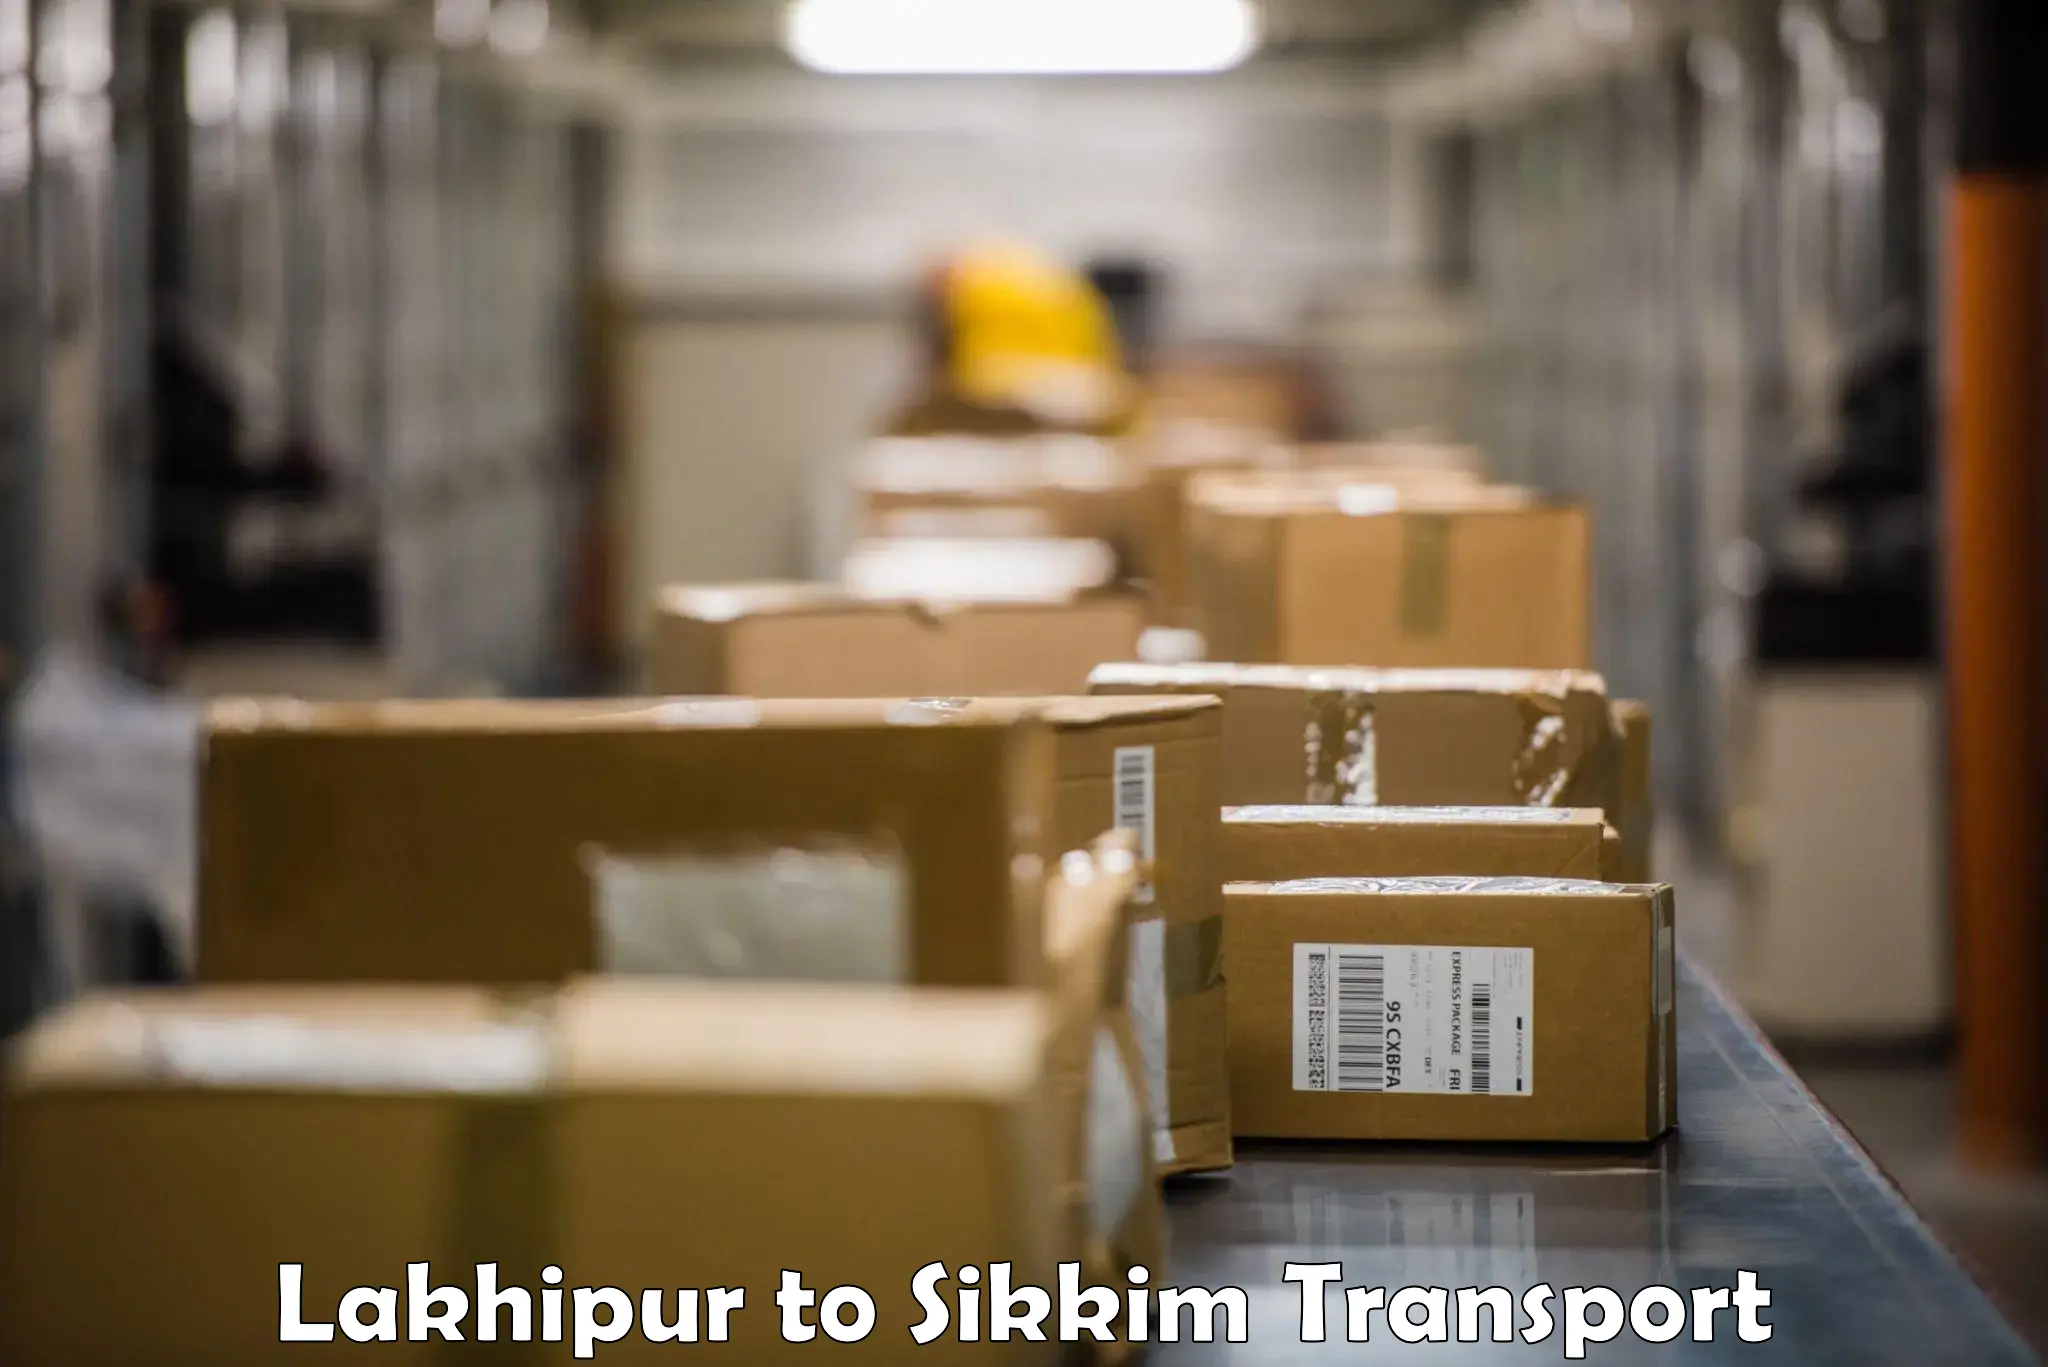 Nearby transport service Lakhipur to Sikkim